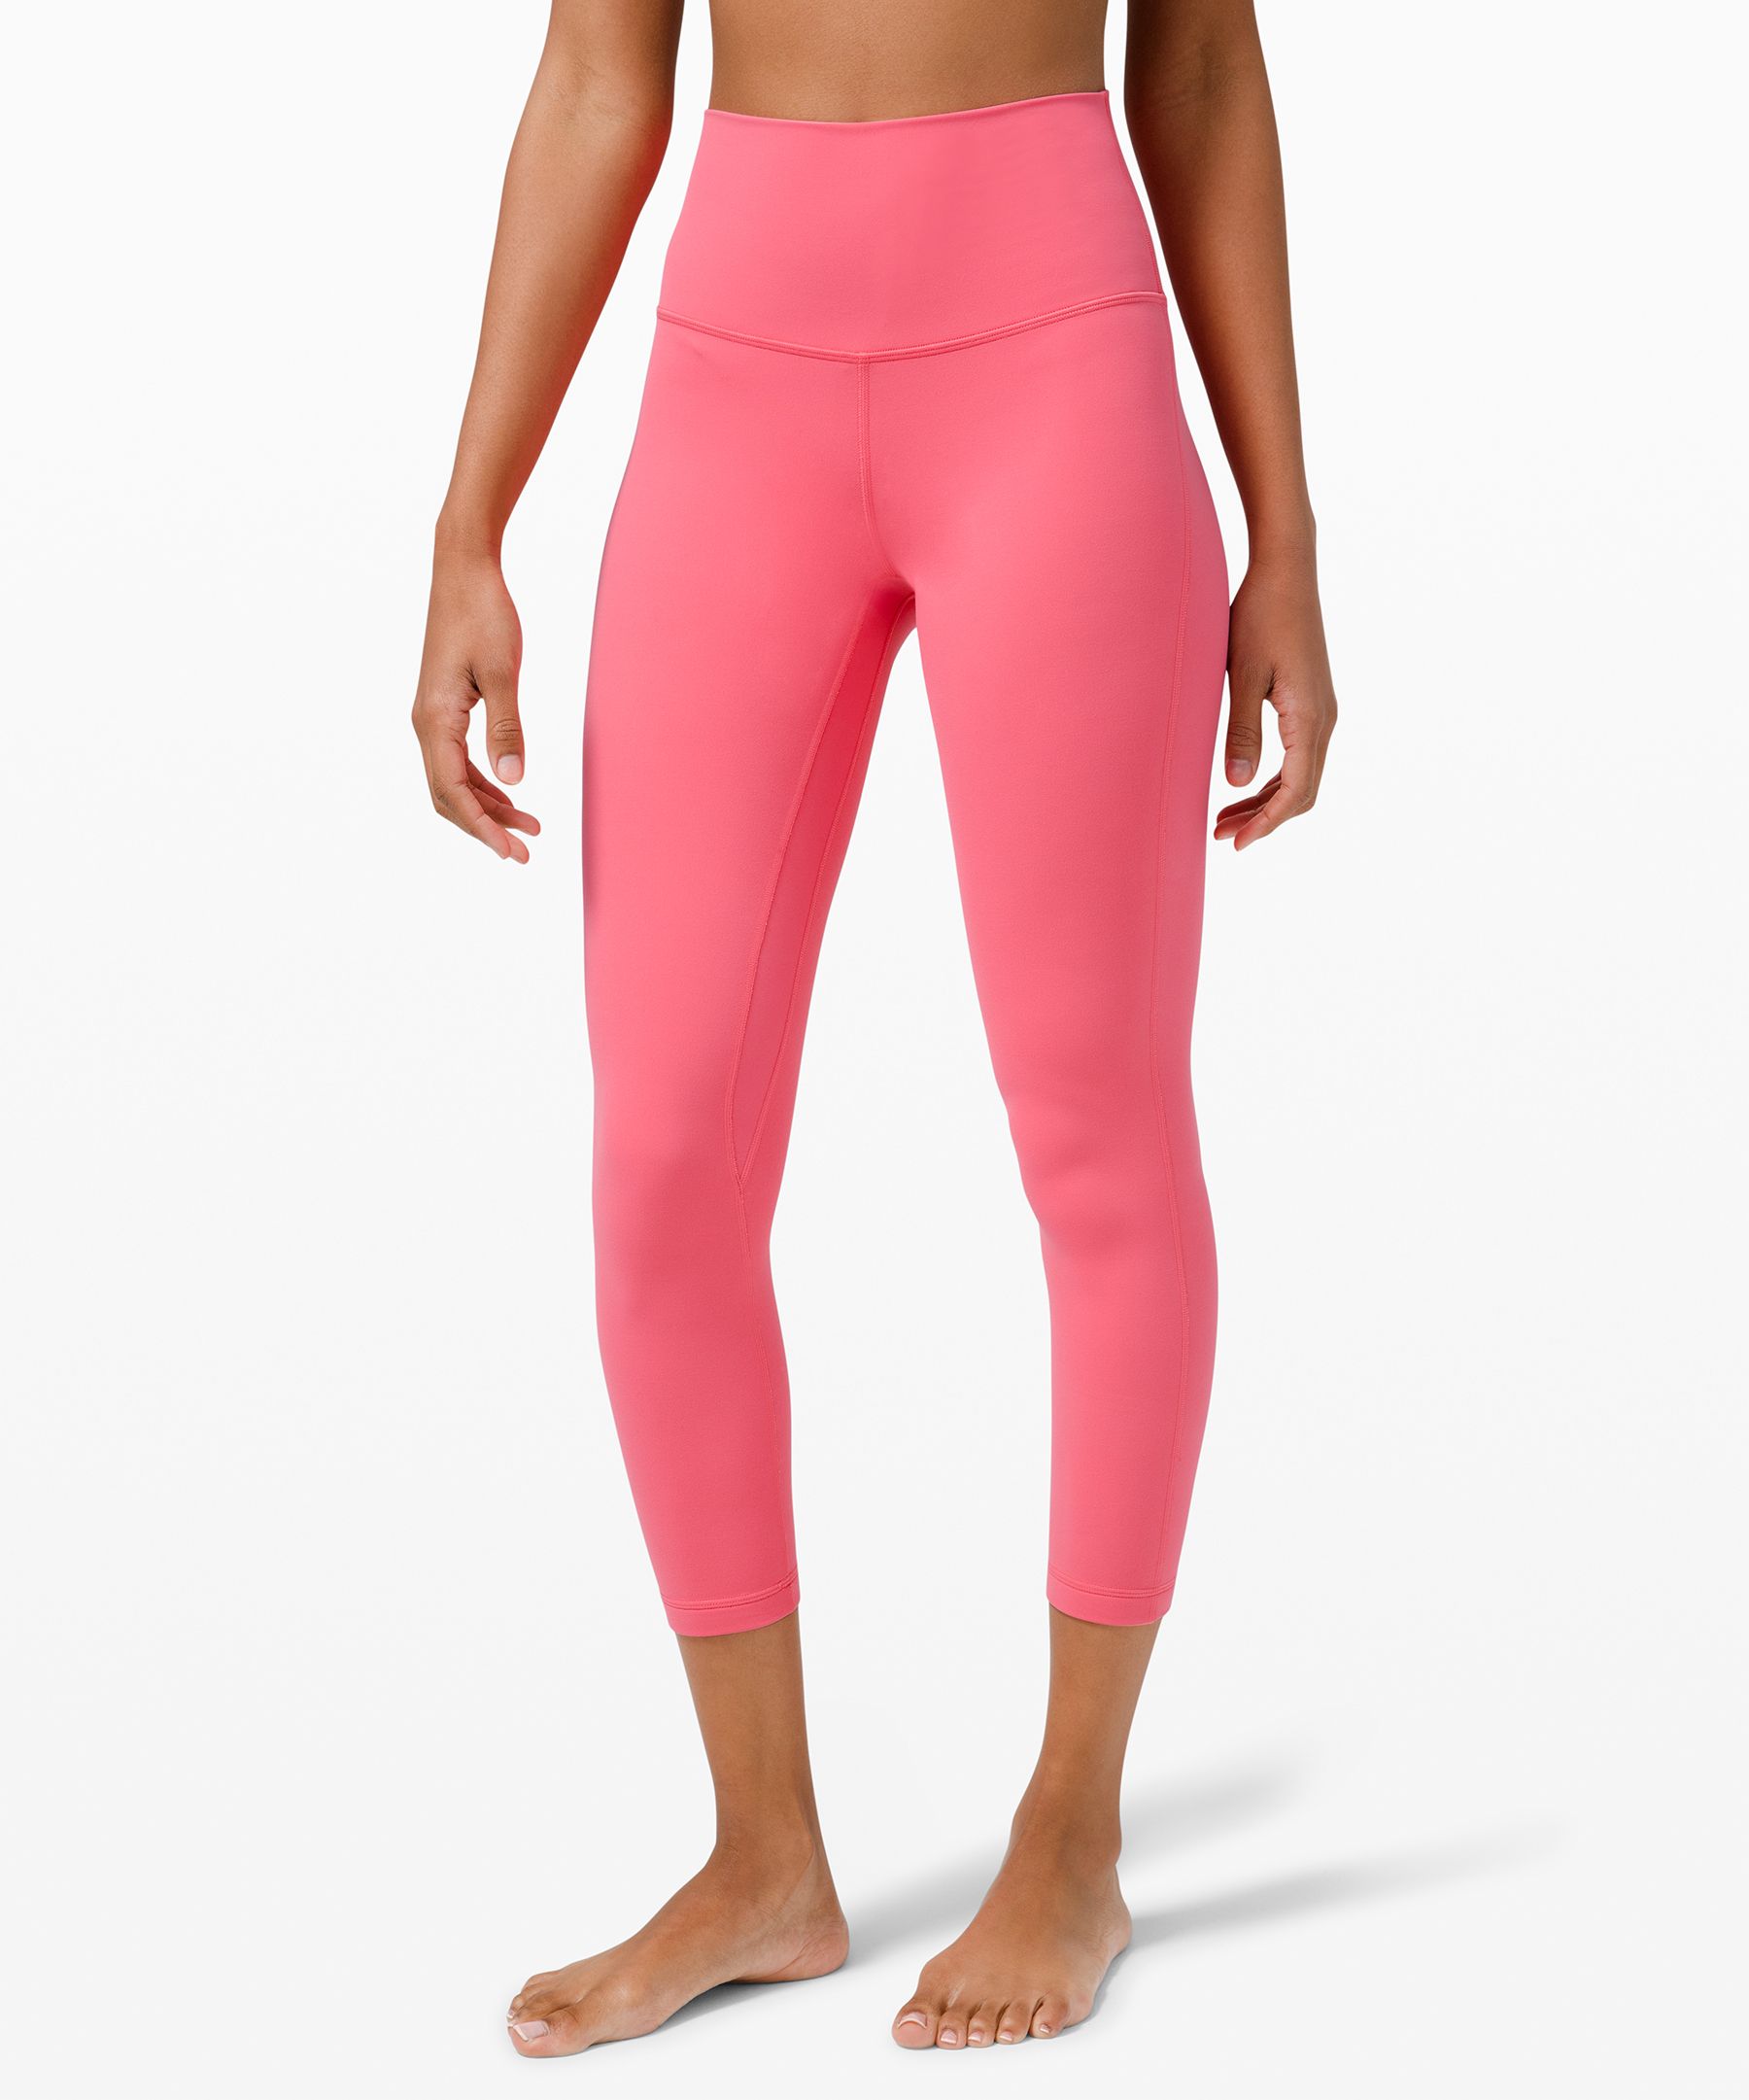 Lululemon Align™ High-rise Pants 25" In Guava Pink